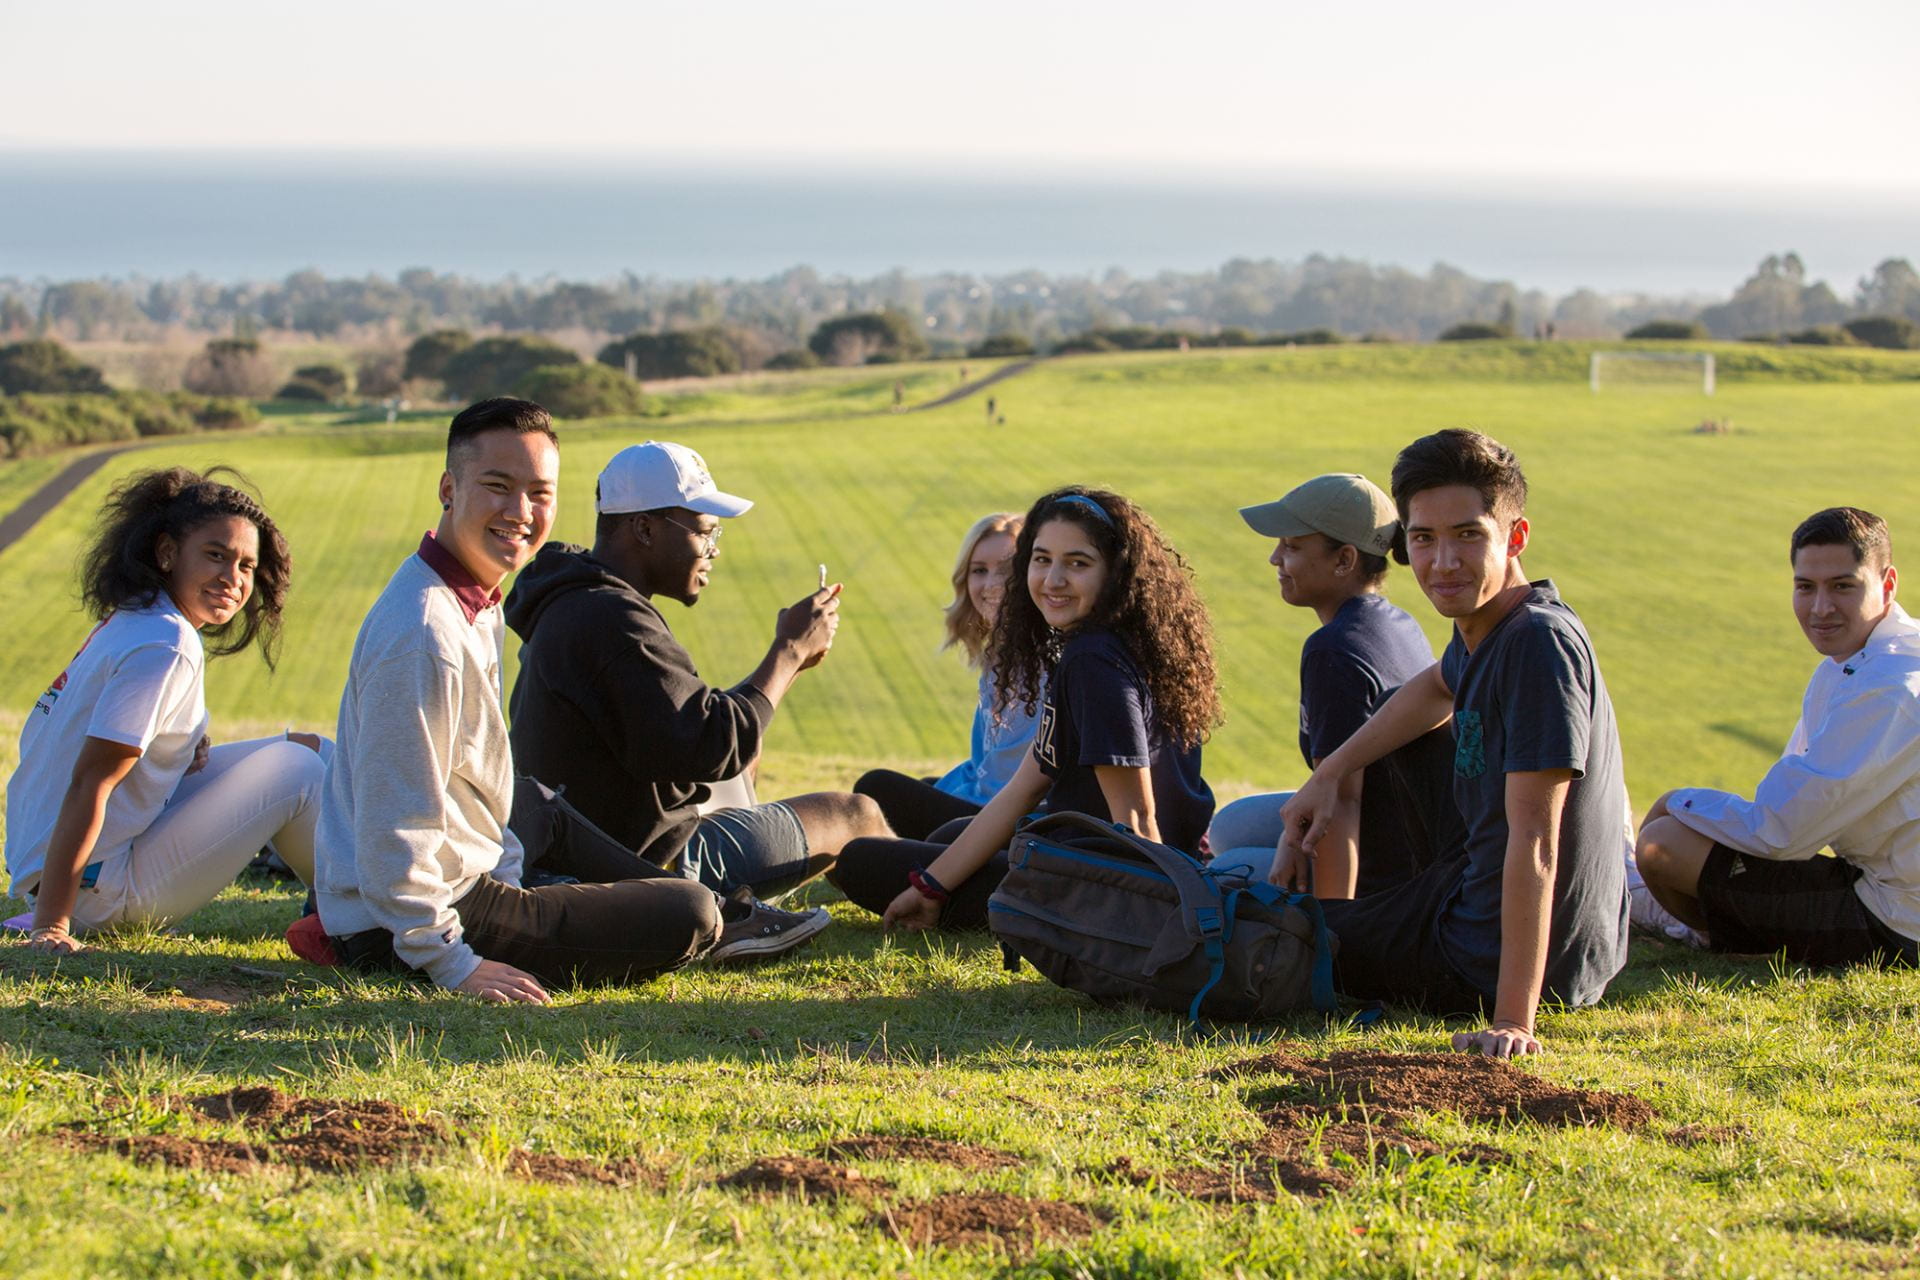 Group of students on a hillside hanging out.